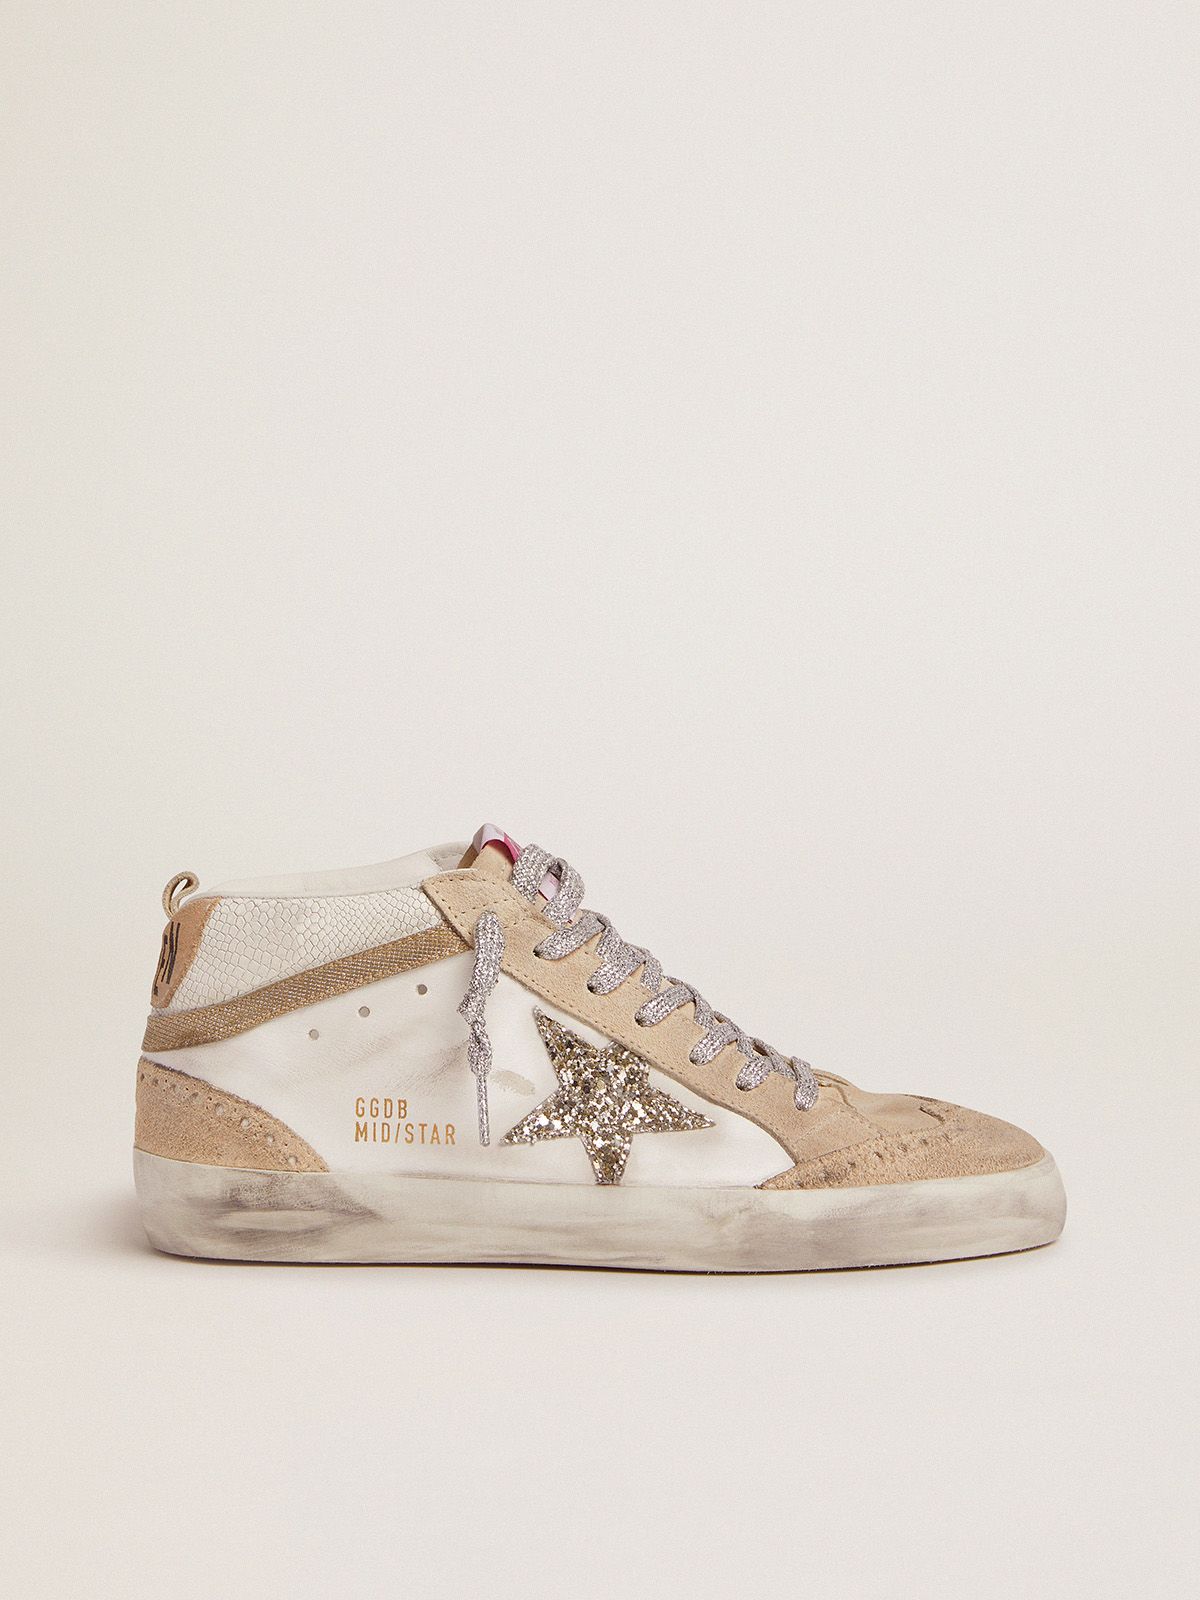 golden goose sneakers light green Star leather and snake-print glitter with Mid insert LTD star